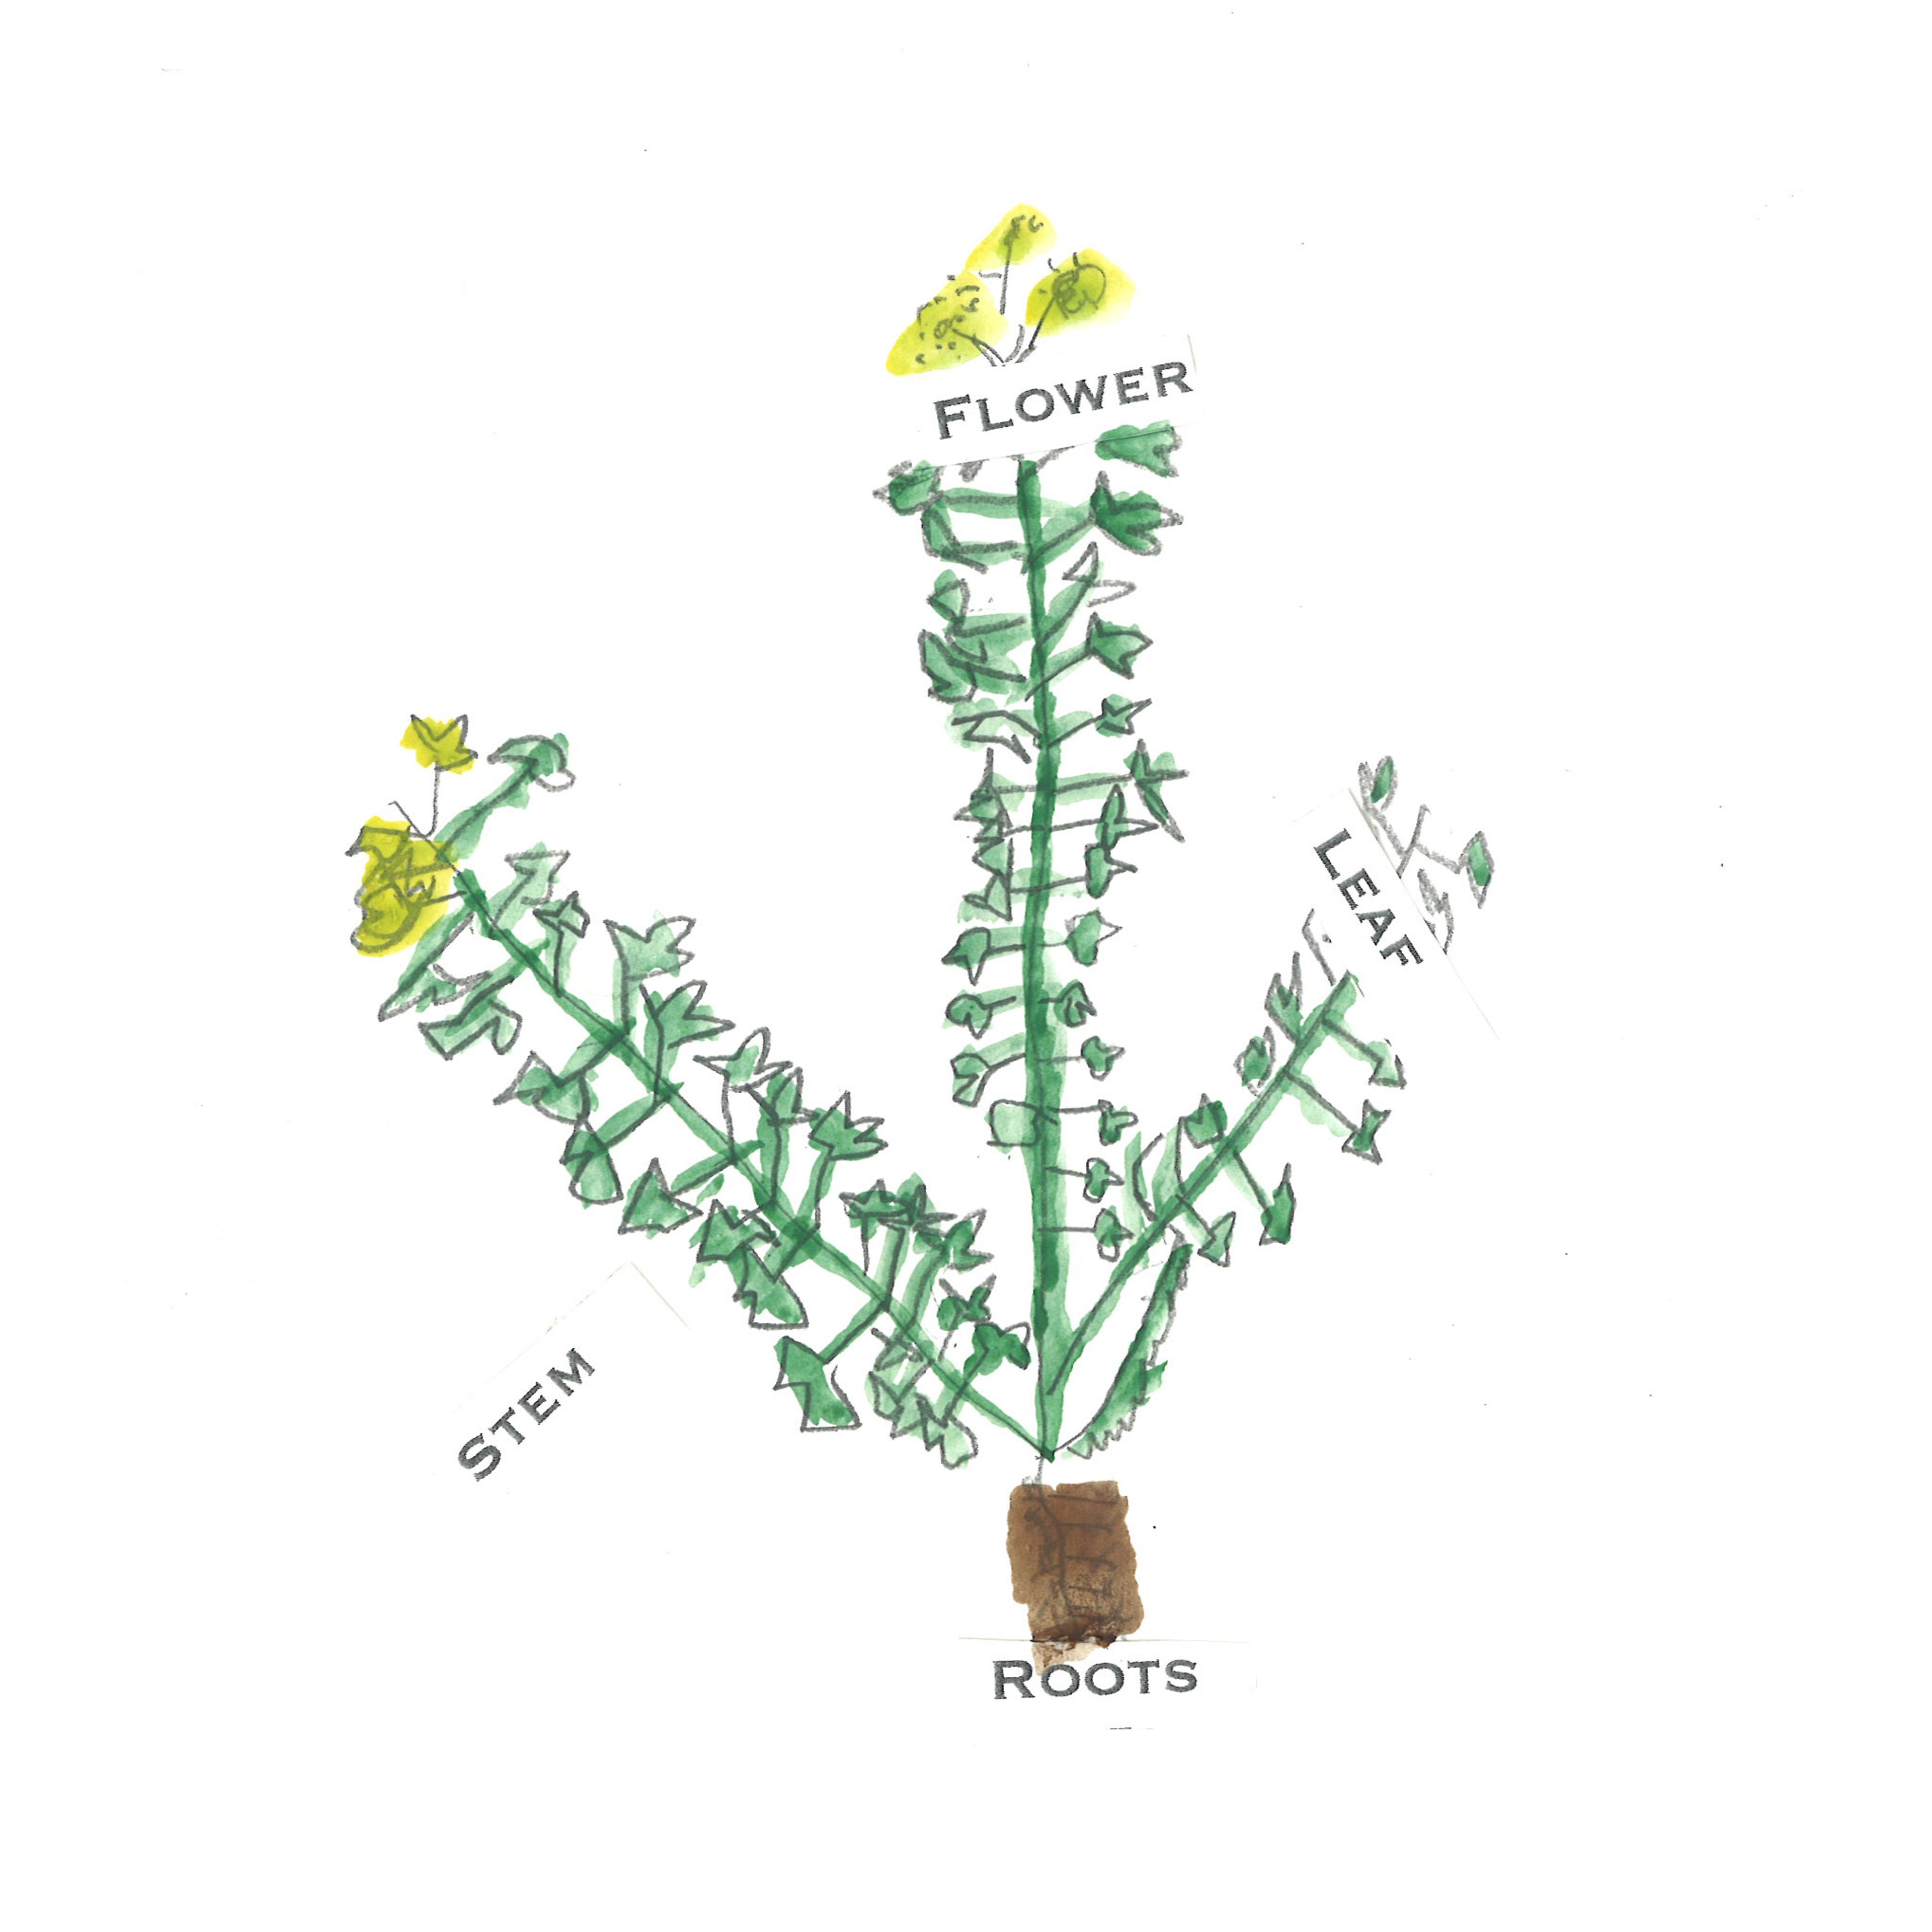 Illustration of a plant with yellow flowers. The stem, roots, leaves and flowers have been labelled.